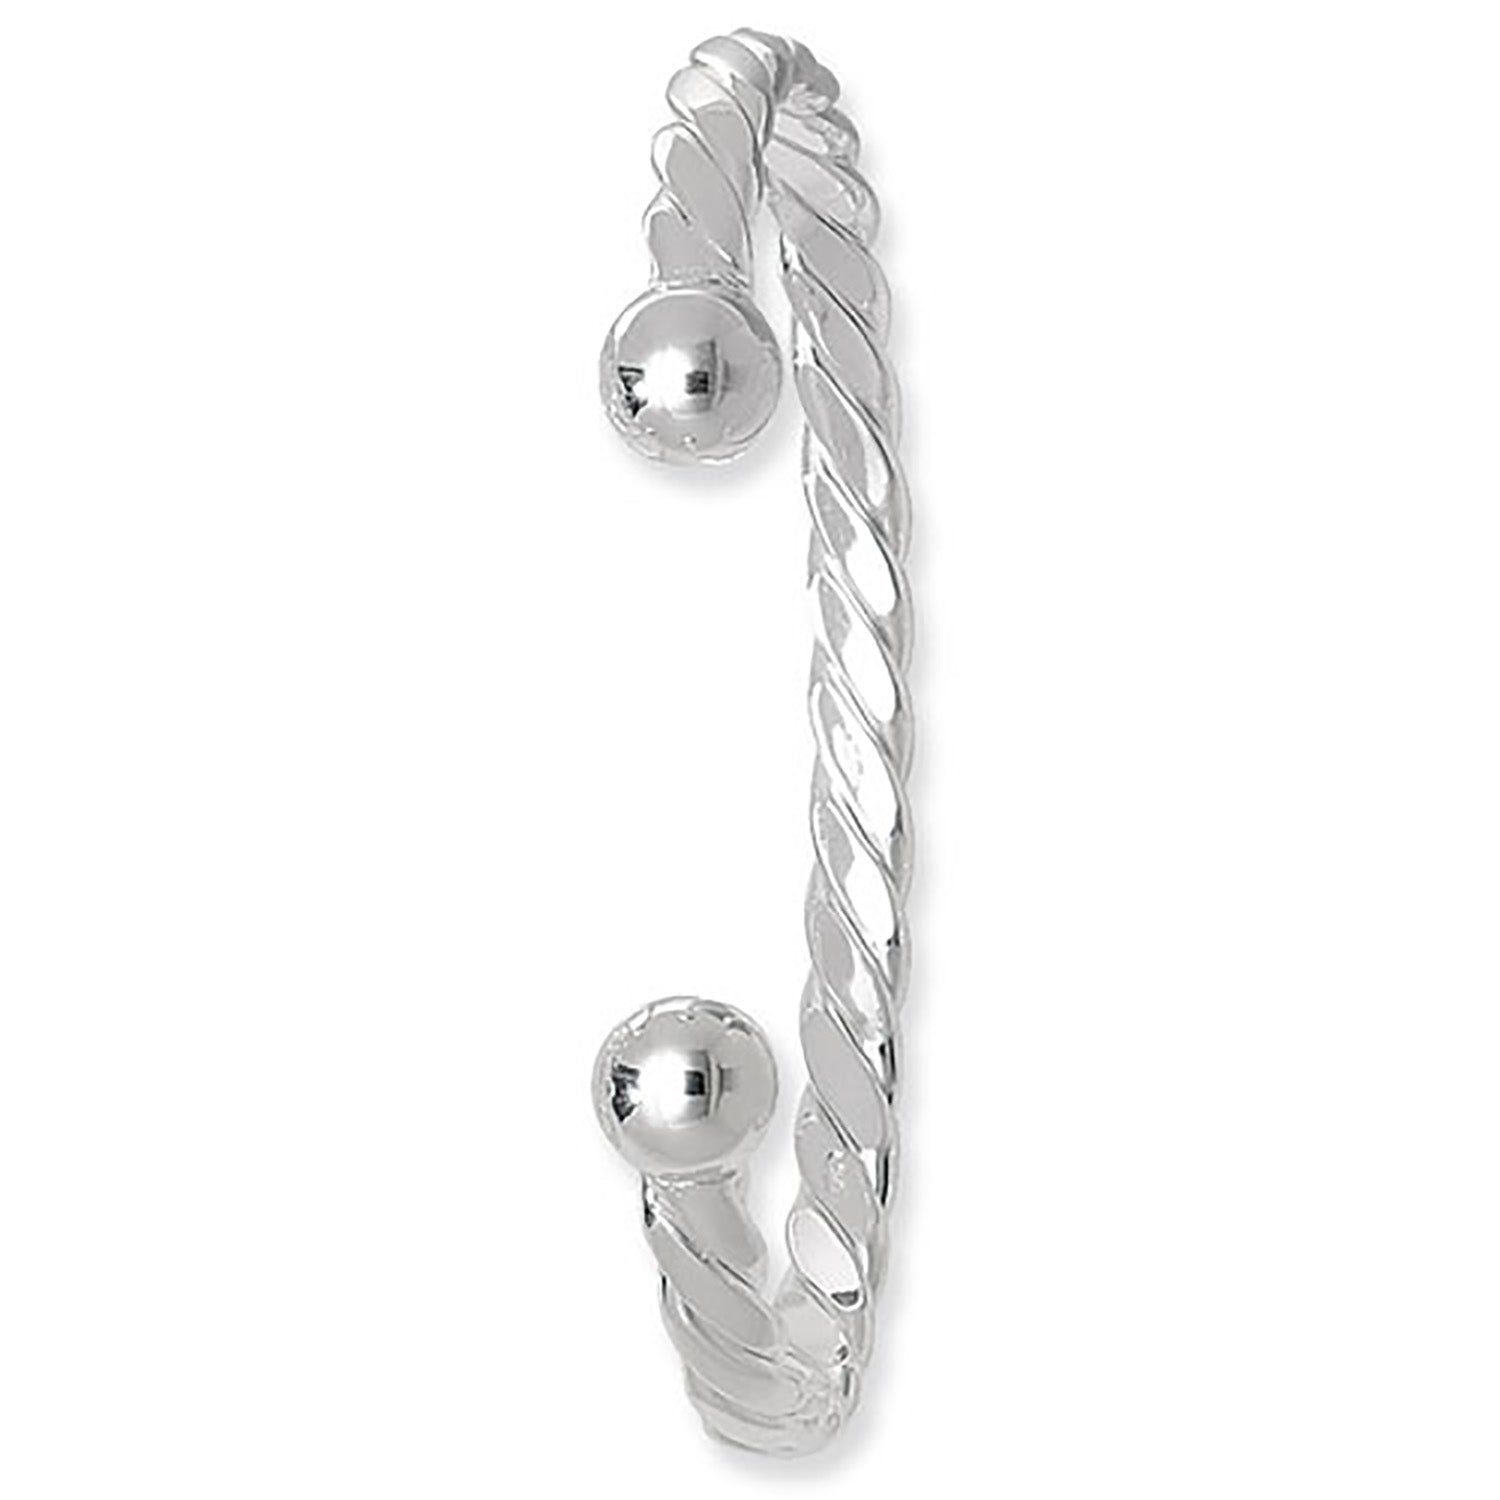 SILVER GENTS' TWISTED TORC BANGLE